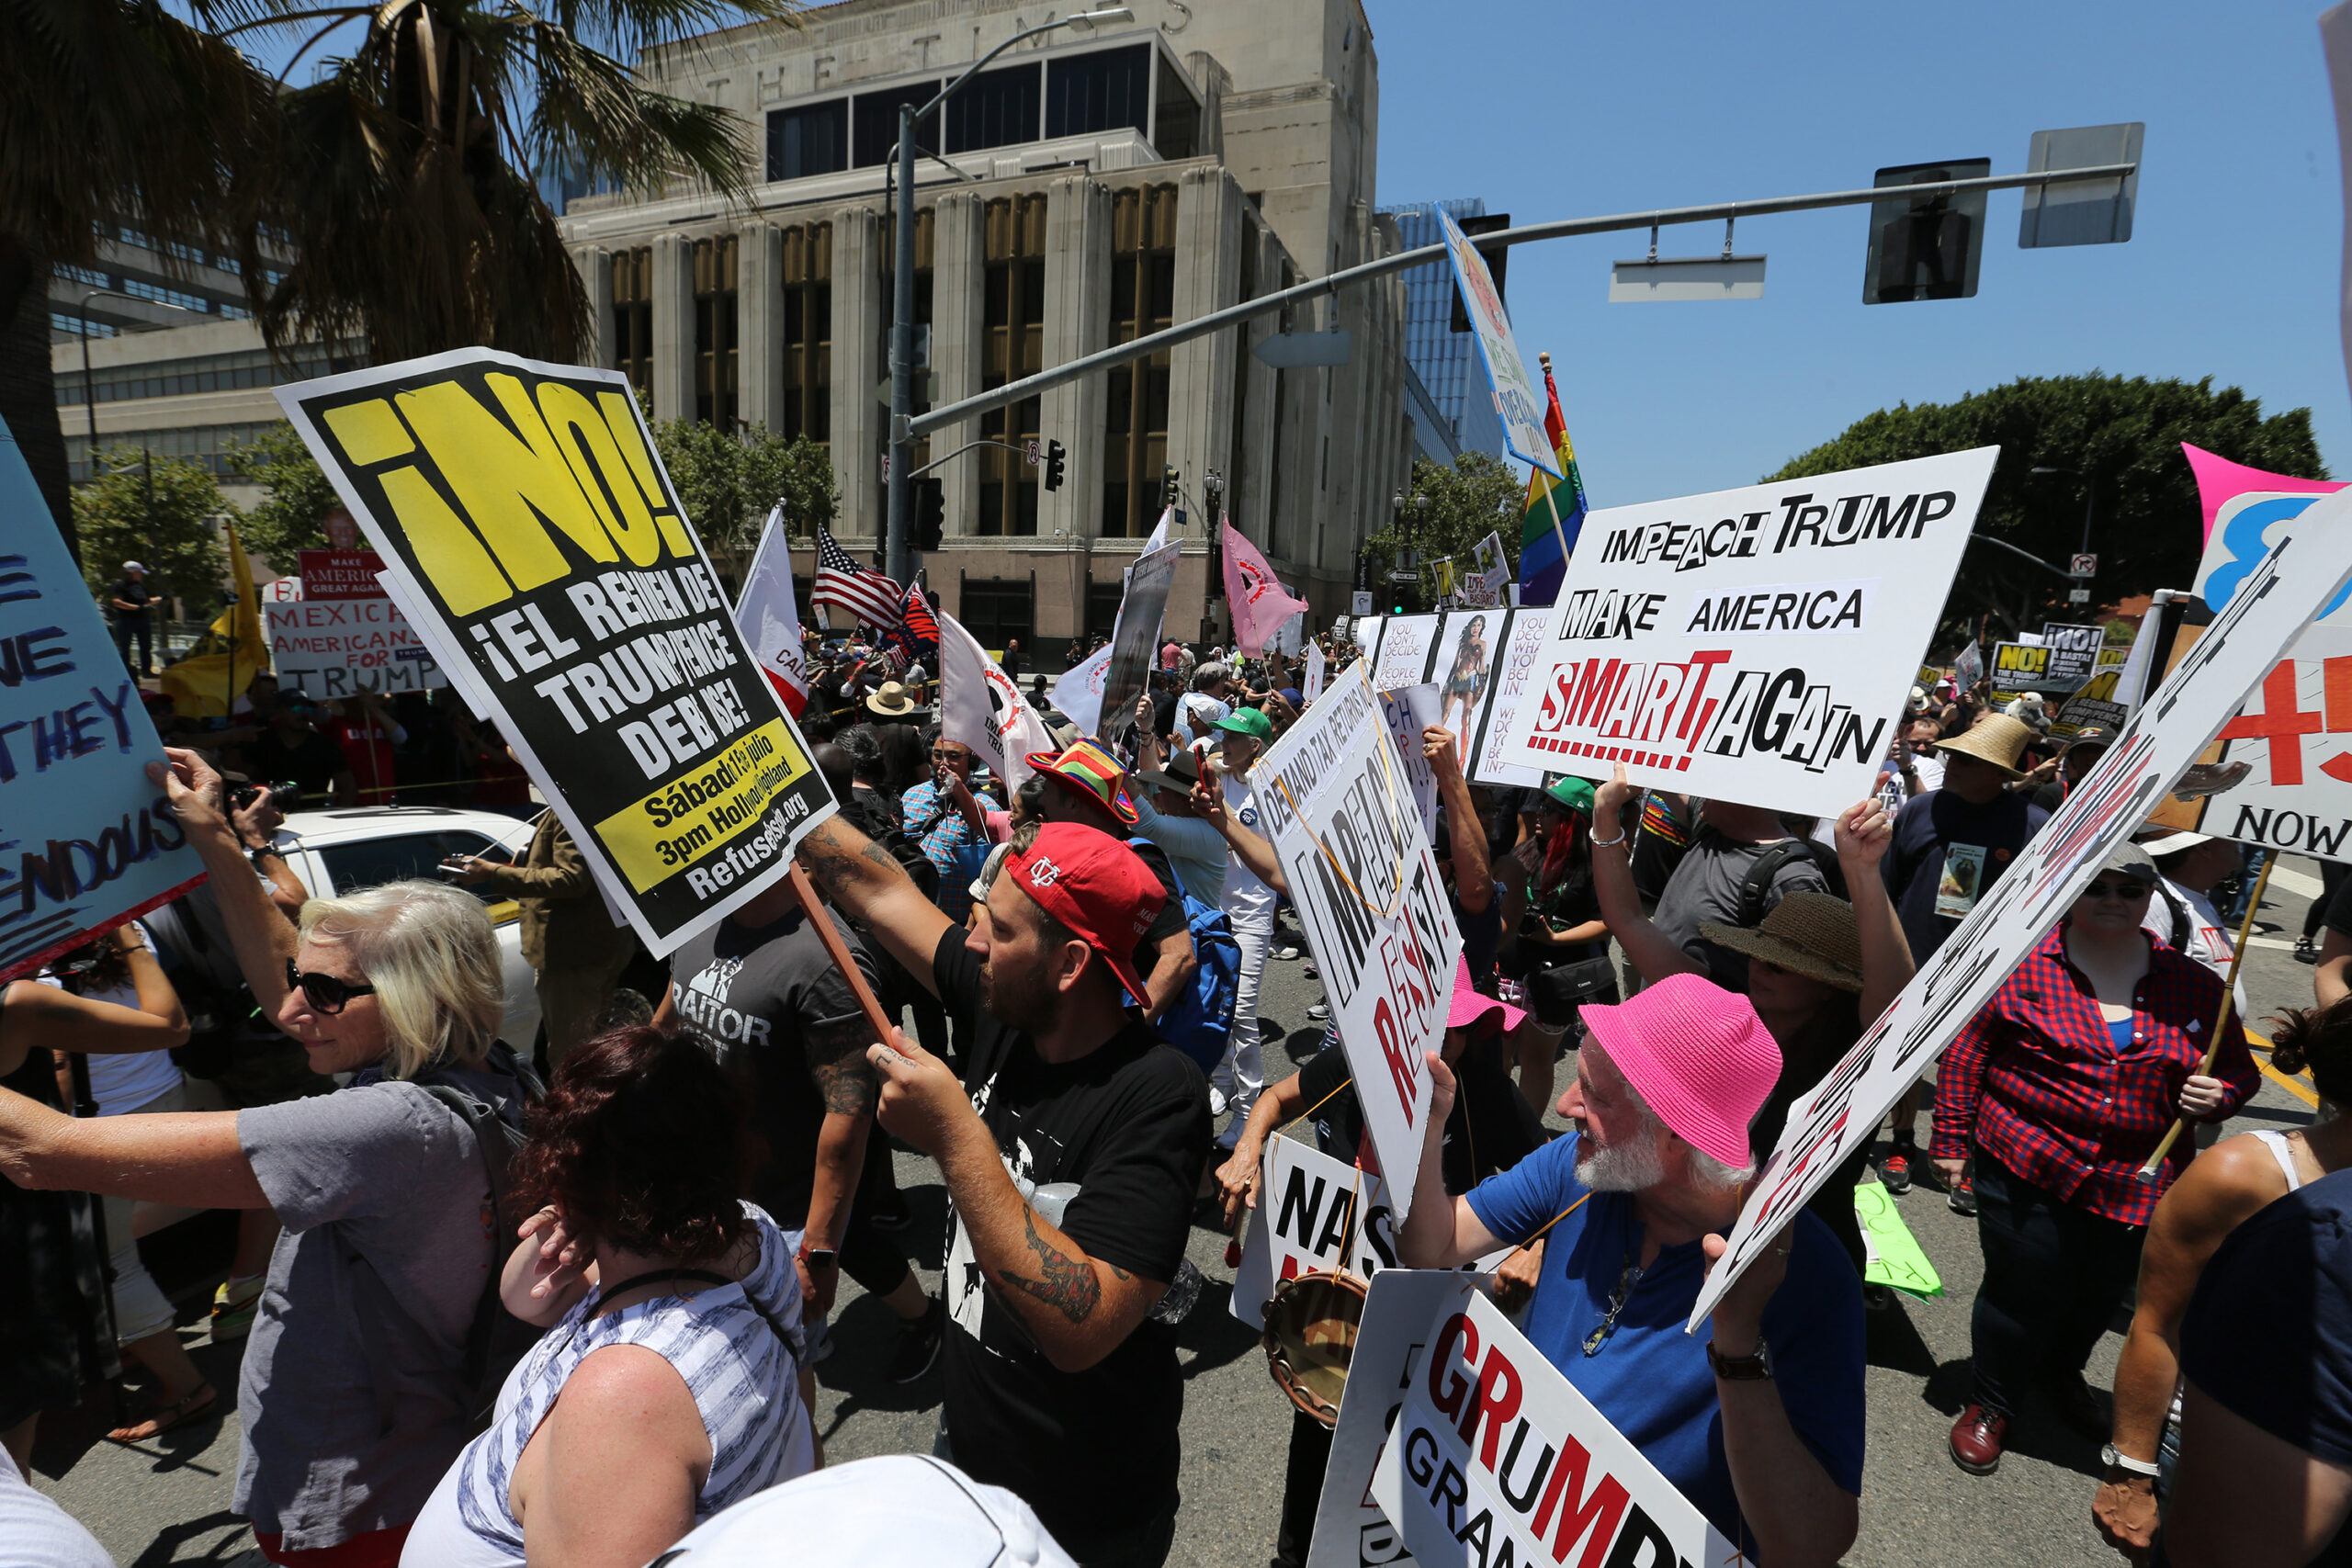 Many protesters stand in a street, holding various signs in Pershing Square, Los Angeles.